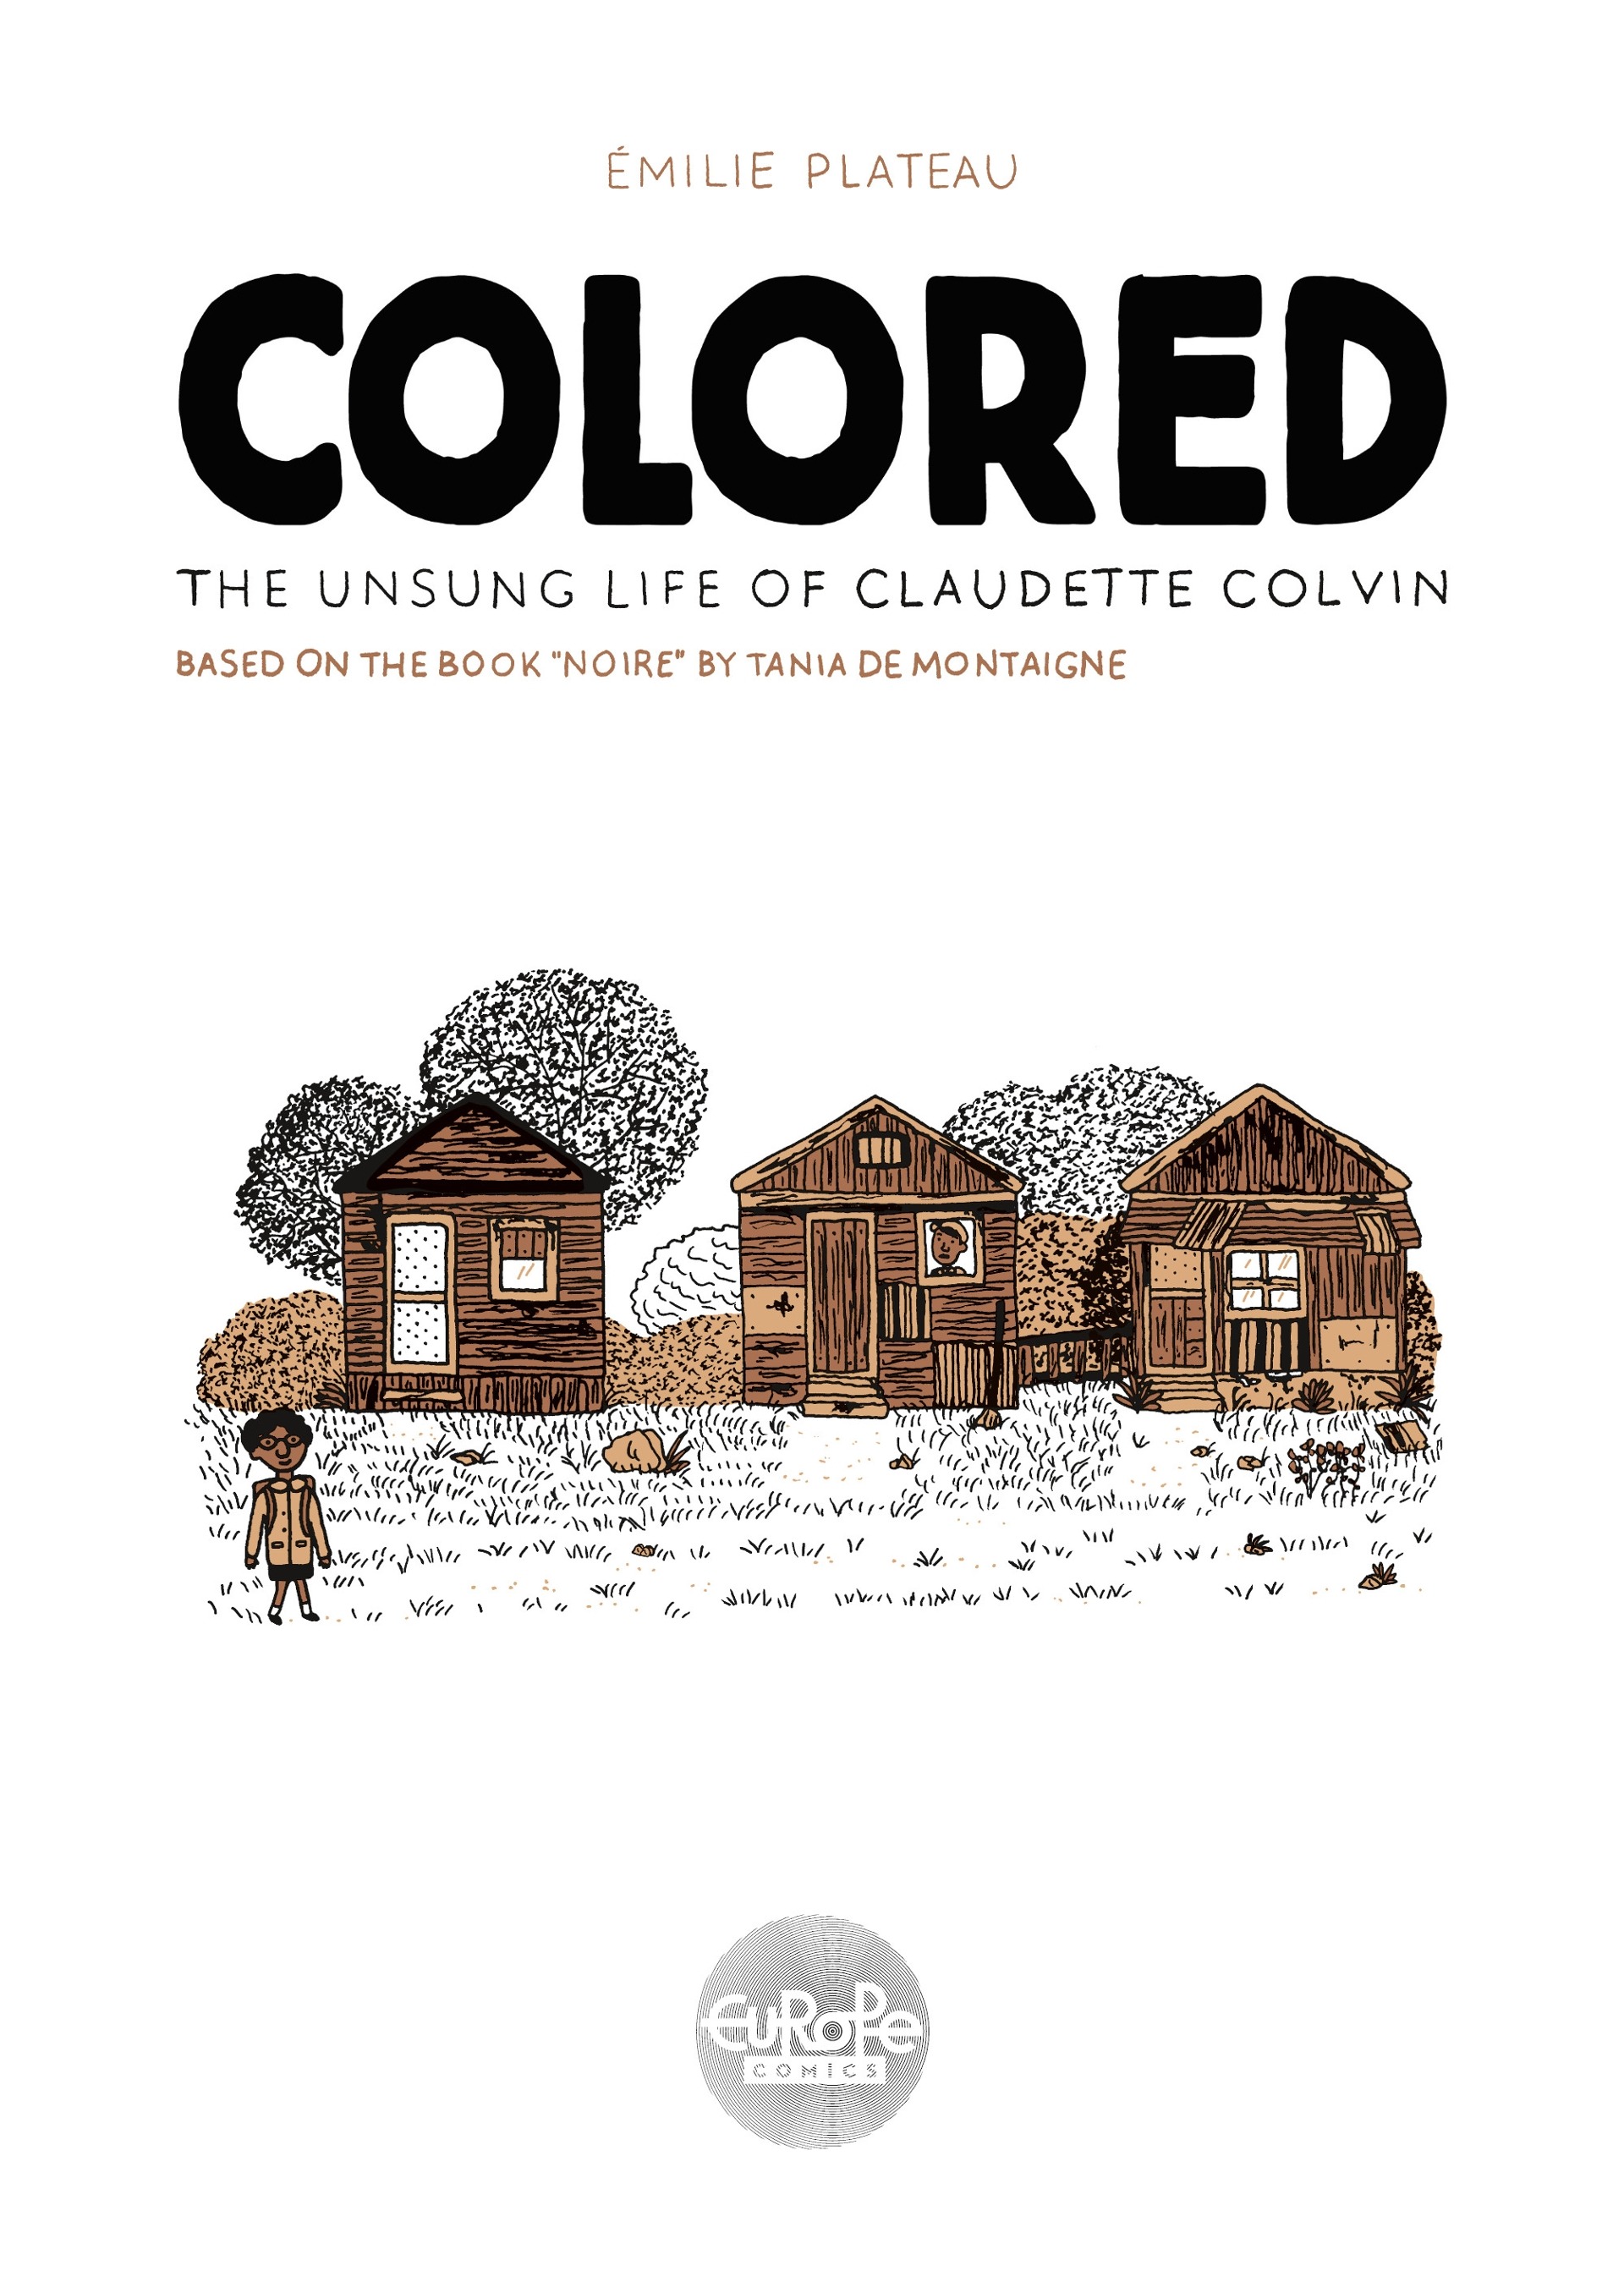 Read online Colored: The Unsung Life of Claudette Colvin comic -  Issue # TPB - 3